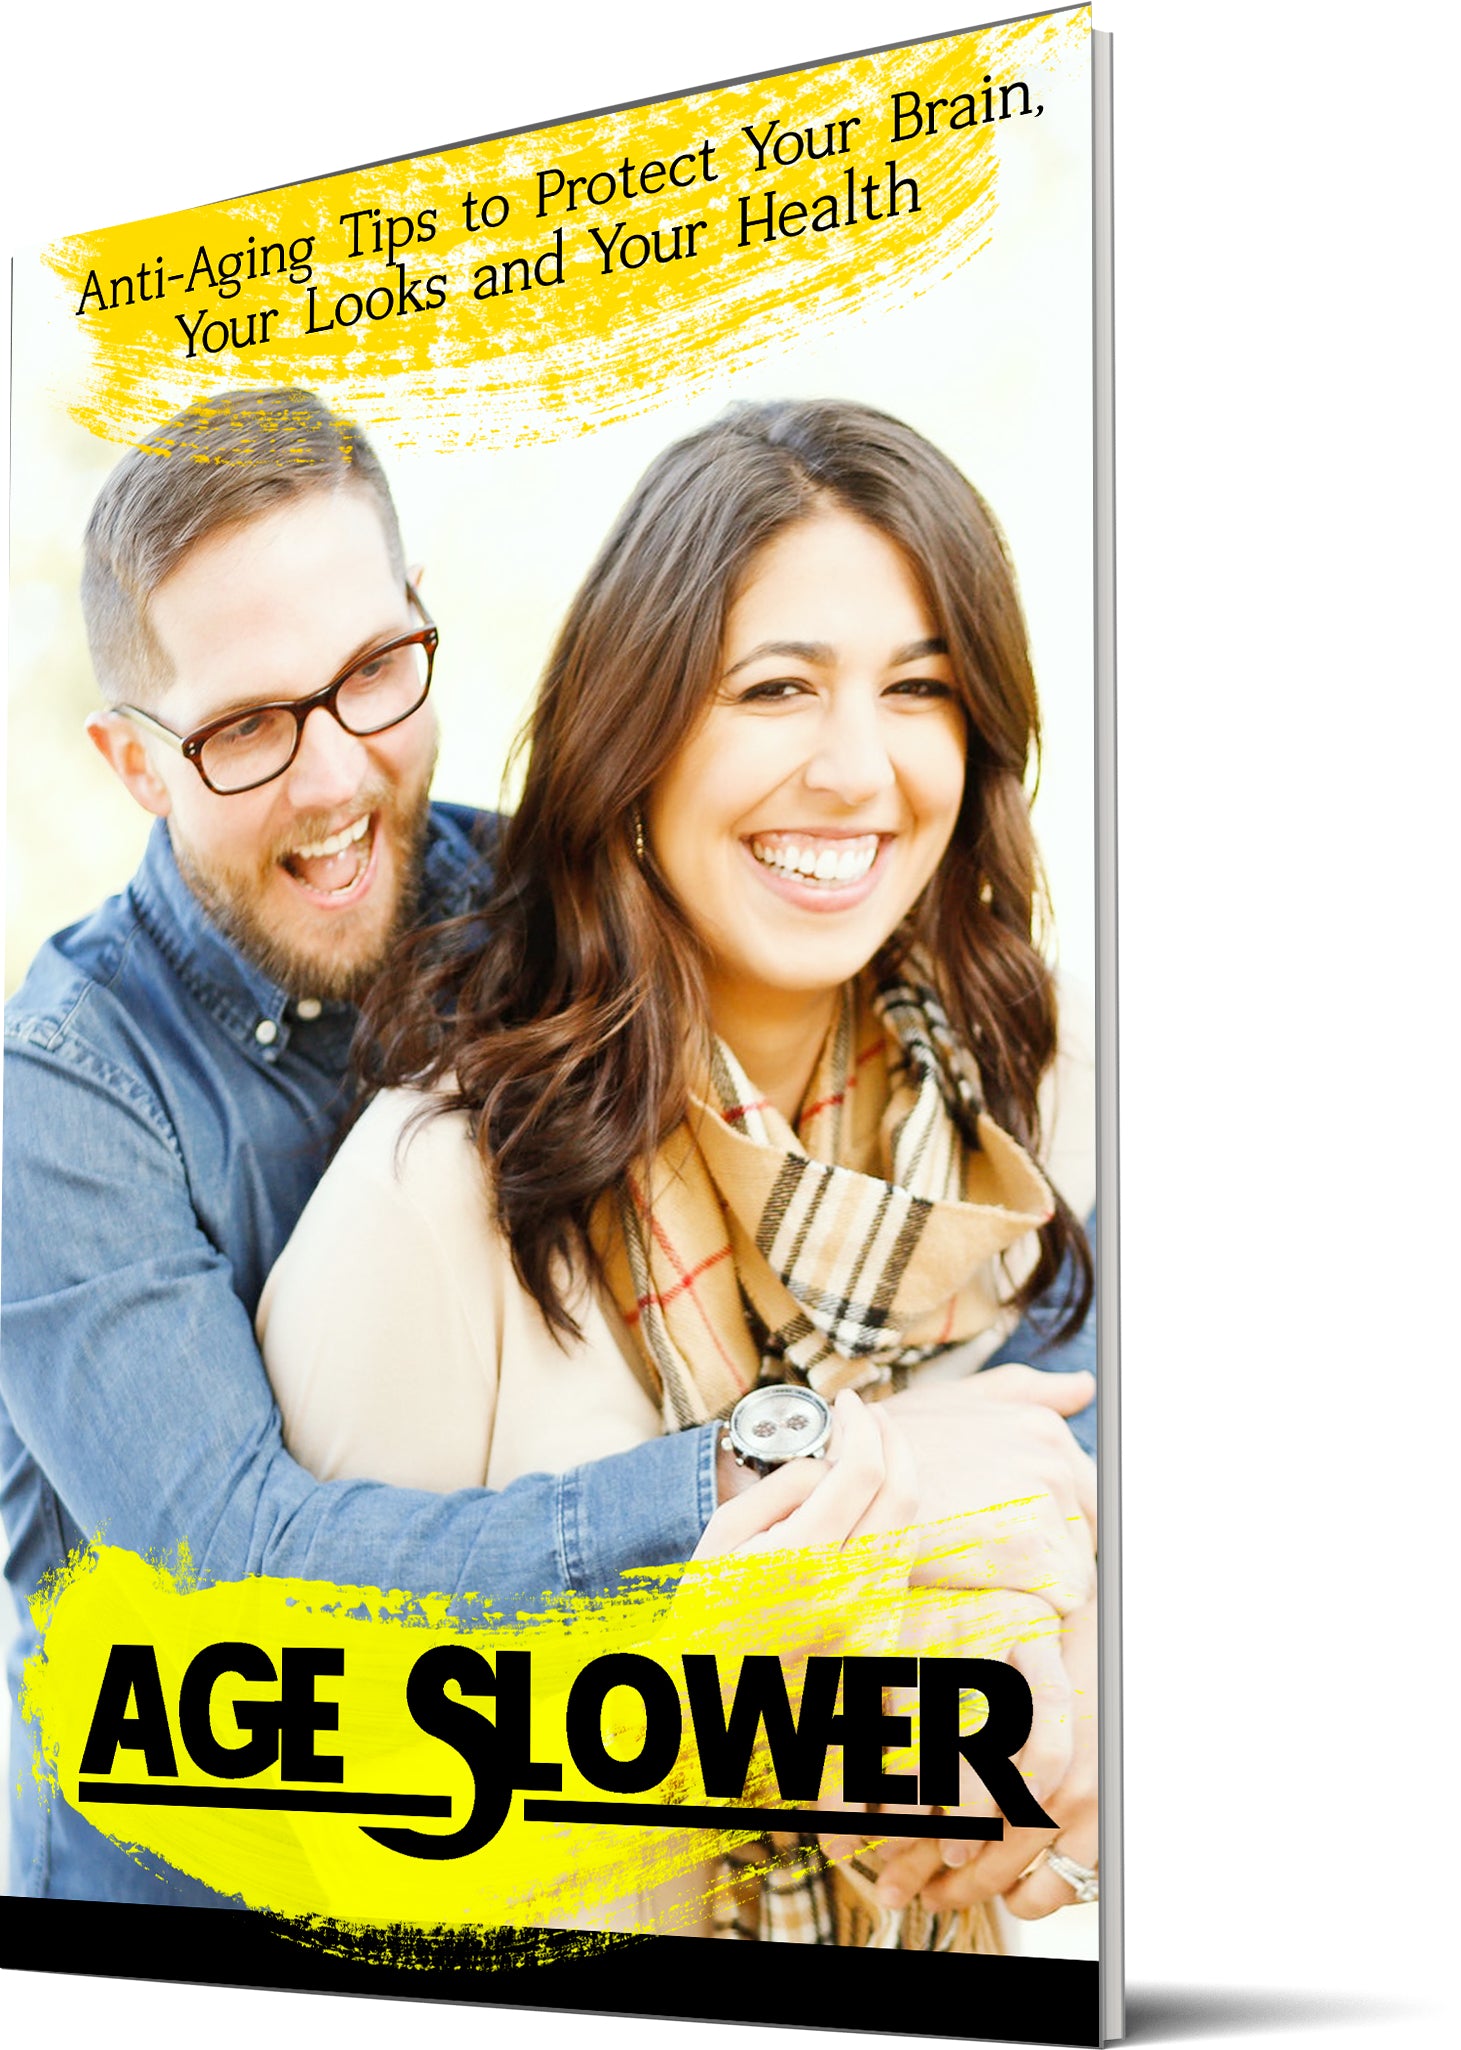 Slow down aging process 